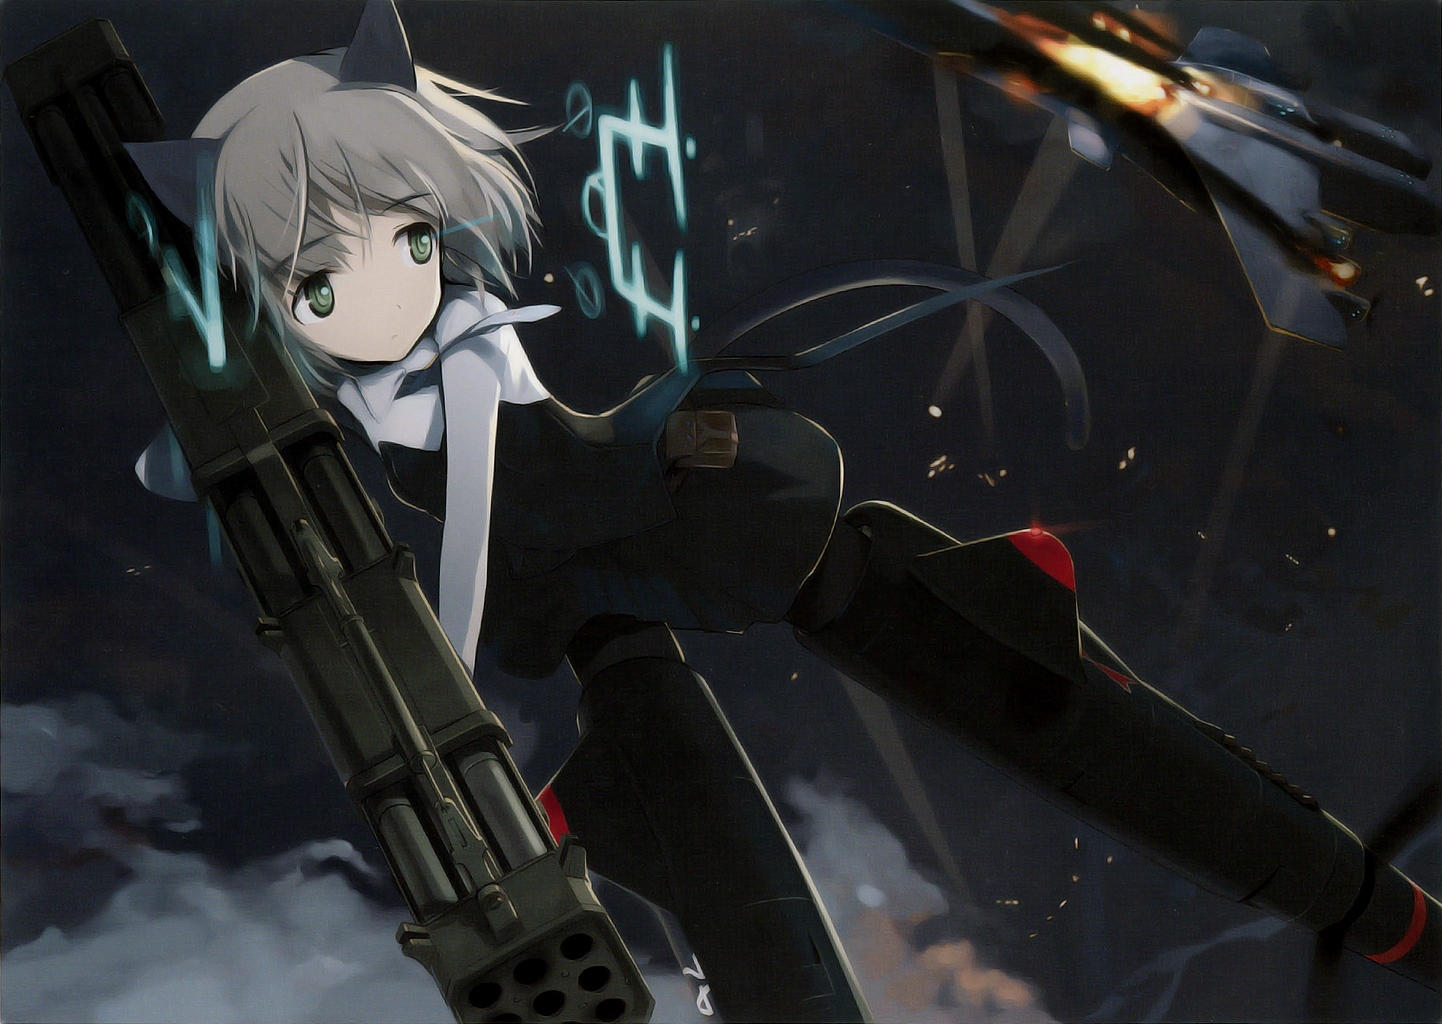 Strike Witches - Sanya by arroba254